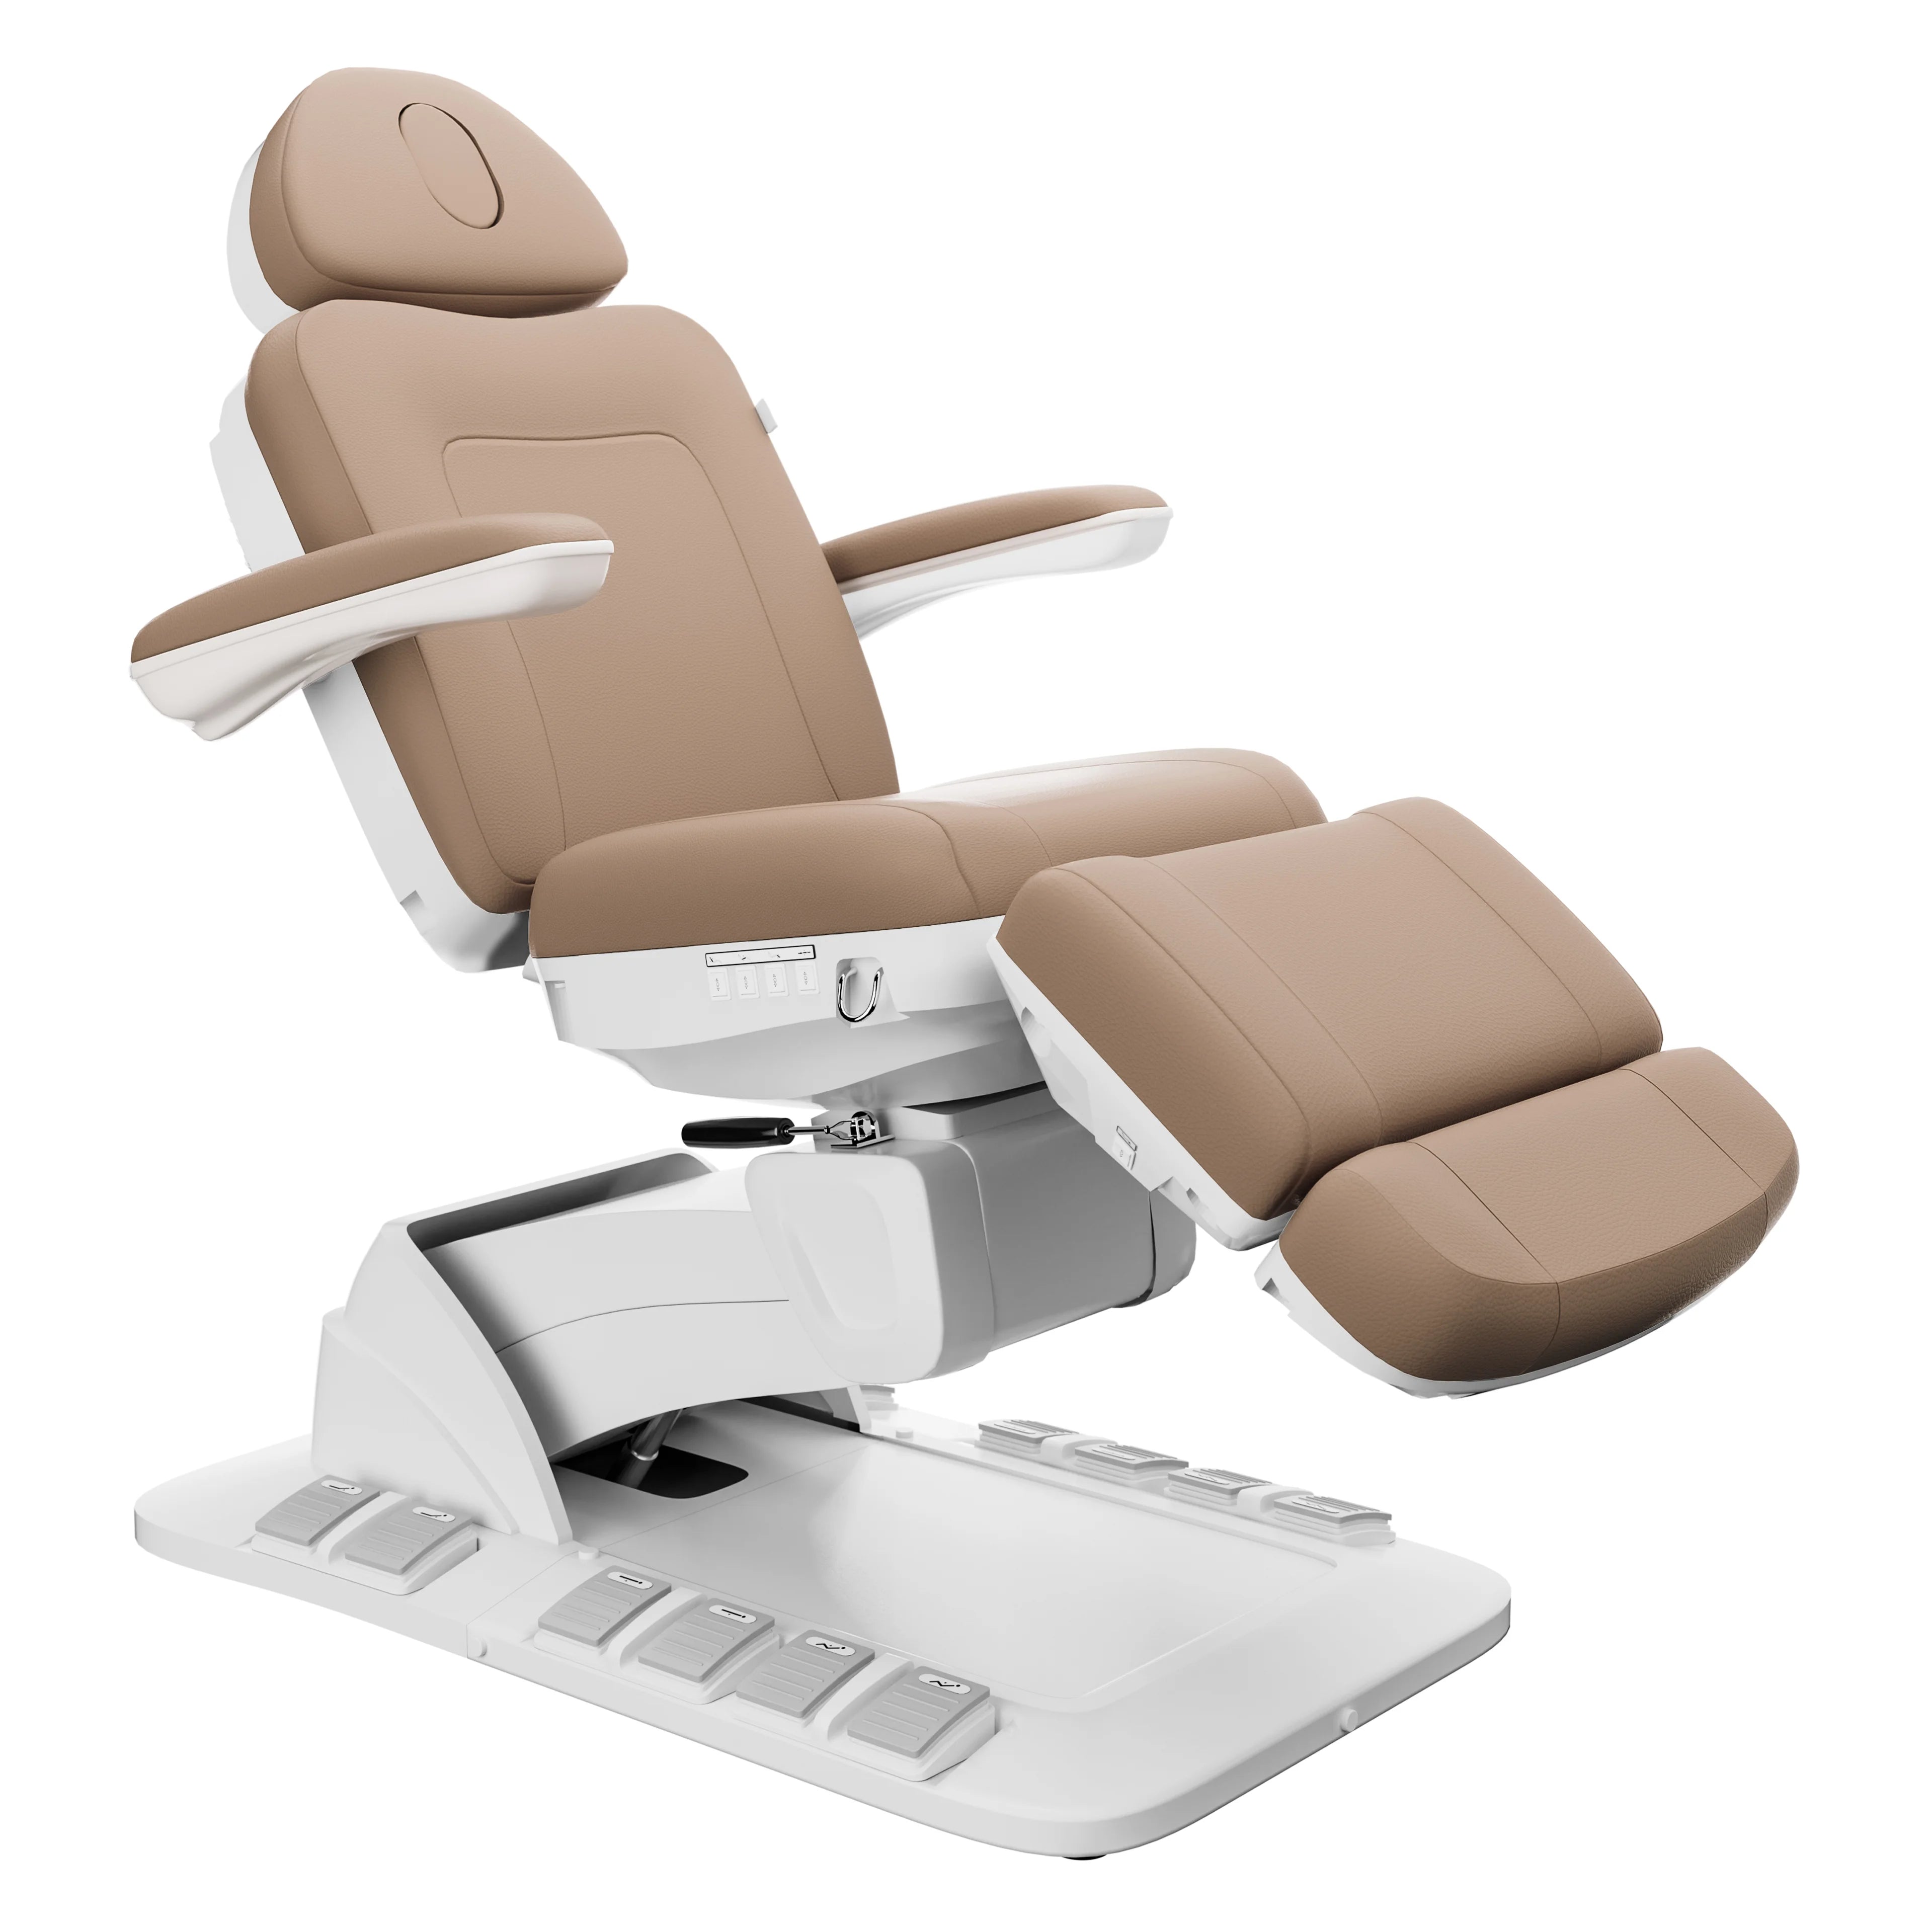 SpaMarc . Novato (Brown) . Rotating . 4 Motor Spa Treatment Chair/Bed